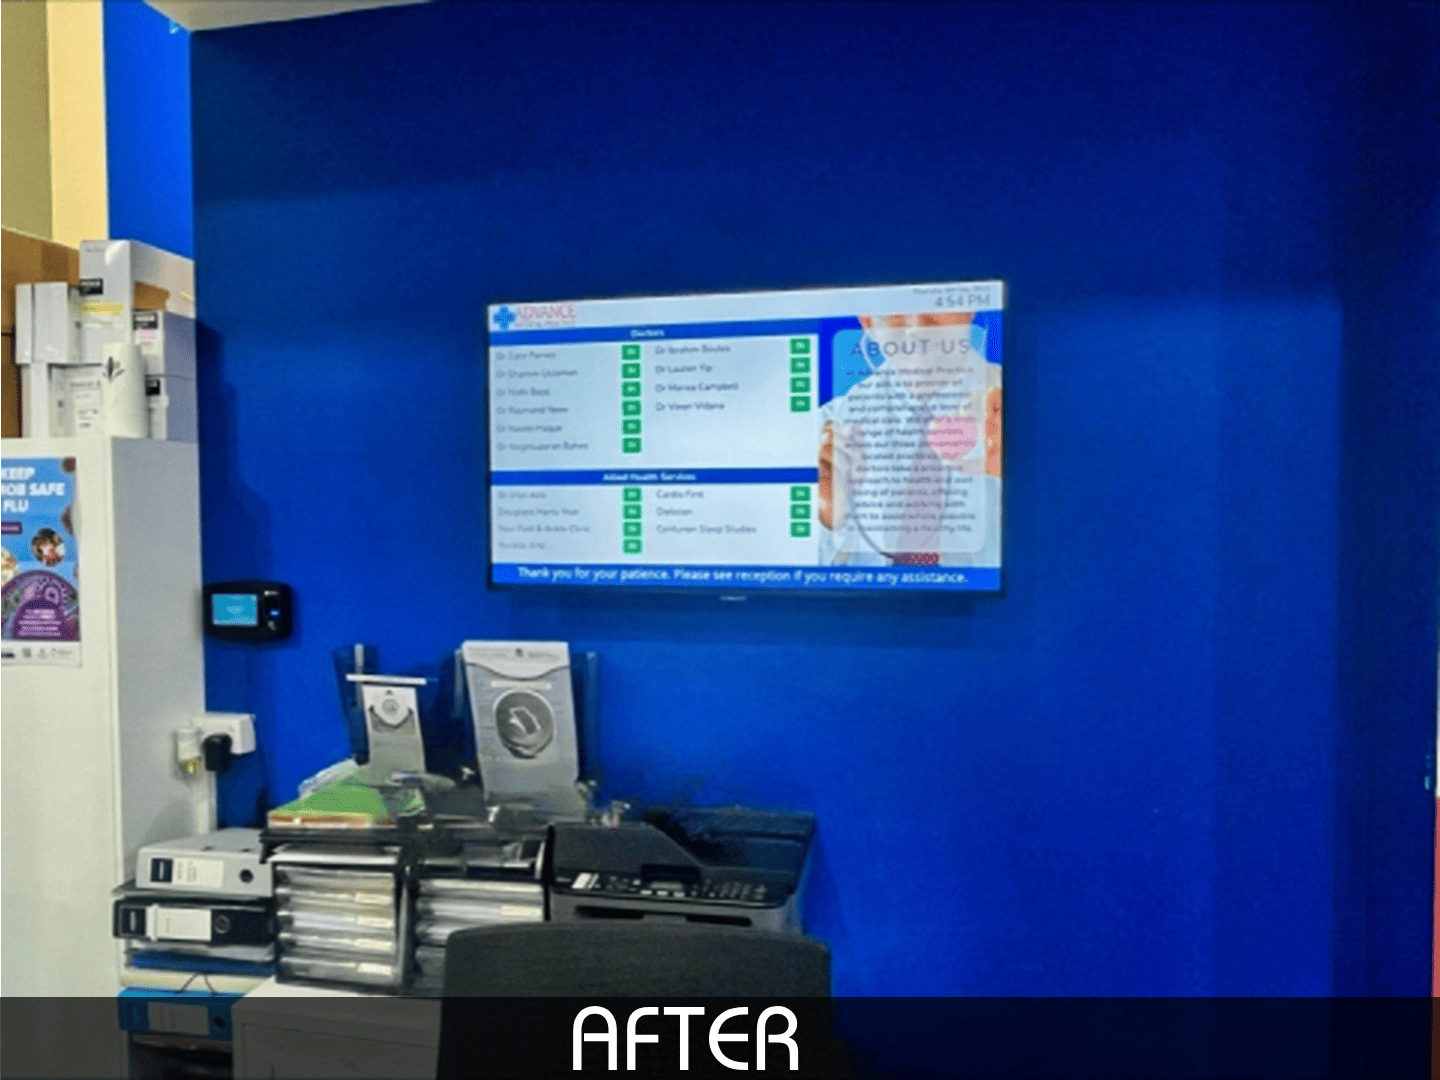 Advertise Me Digital Signage Advanced Medical Practice Doctor Medical Board After with text